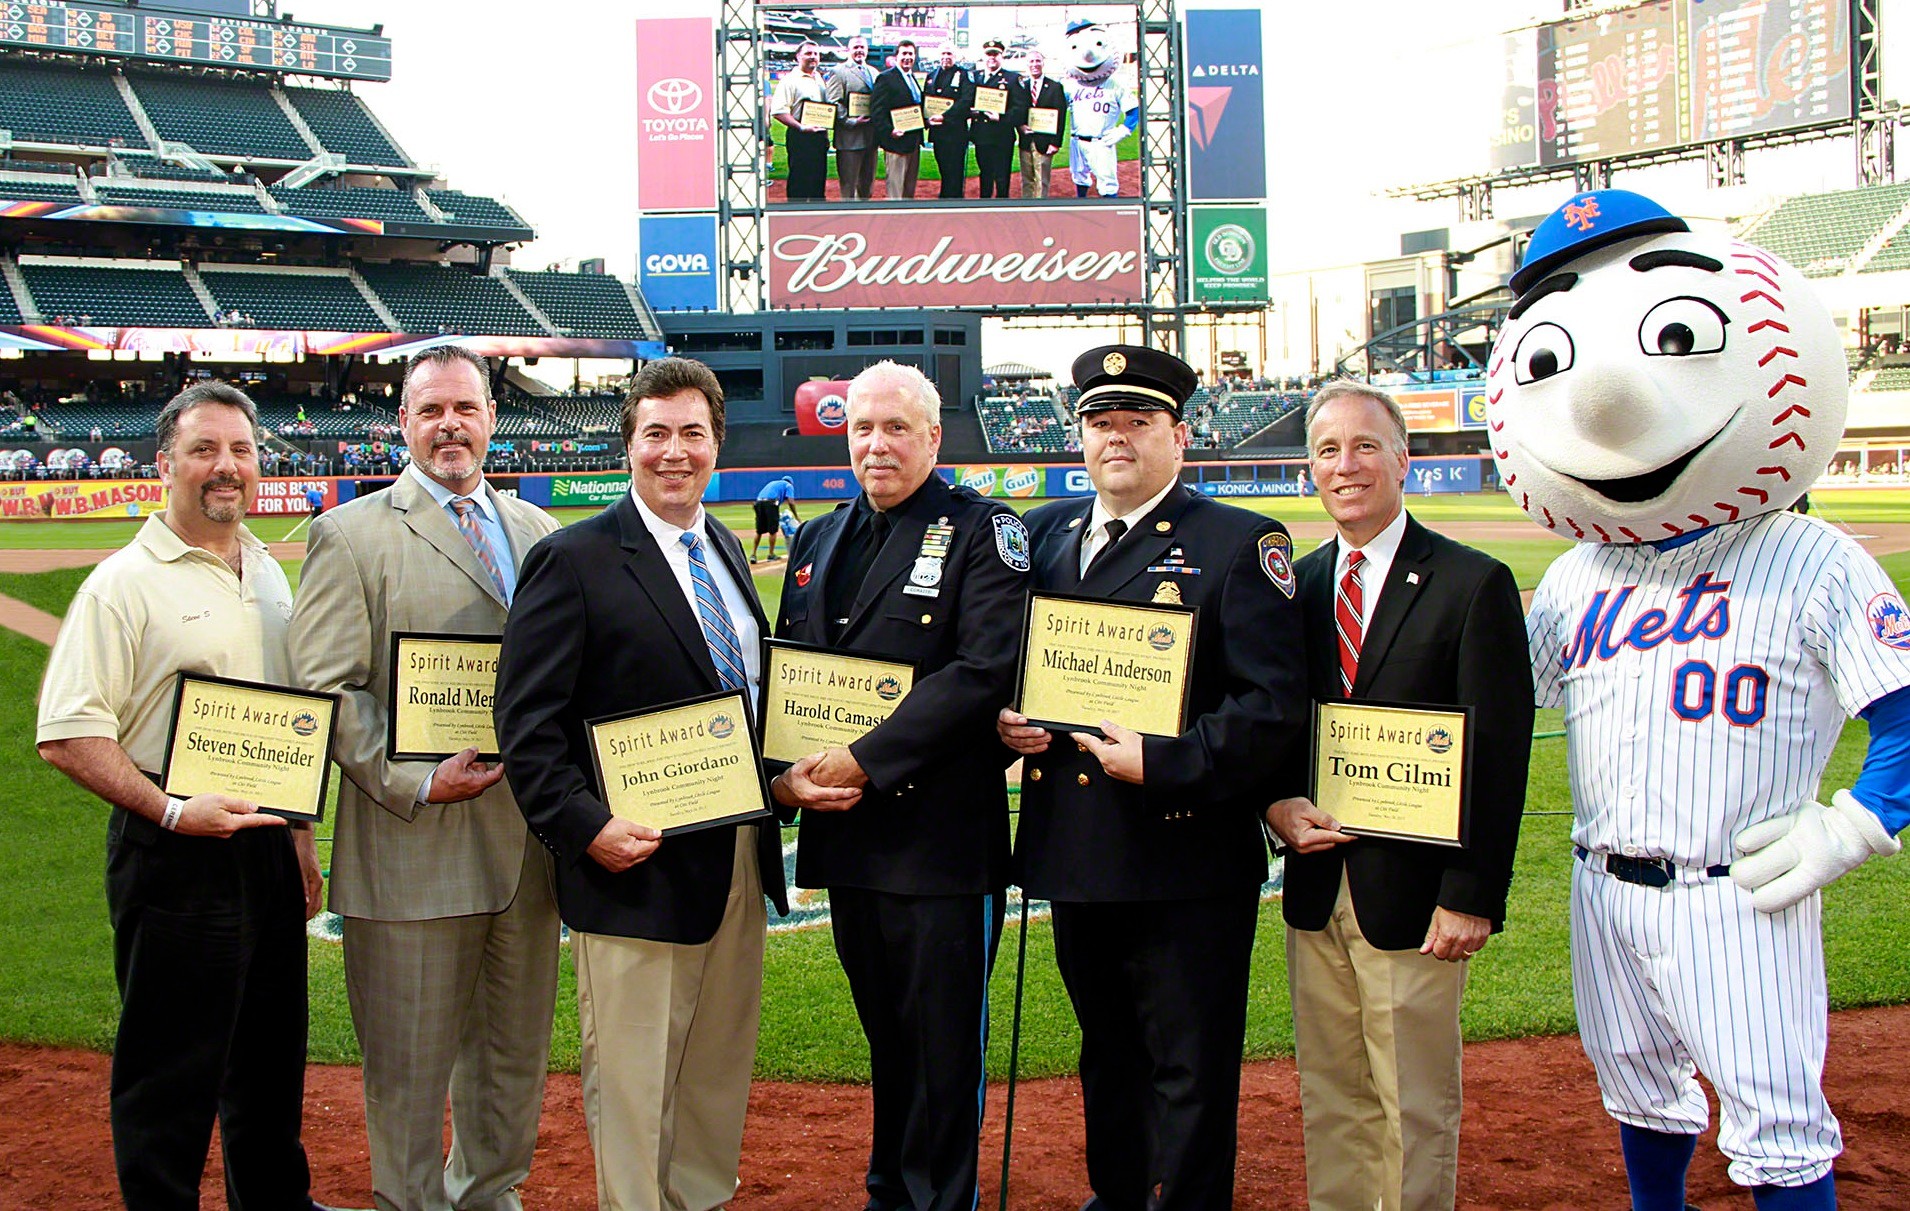 The Lynbrook community spirit award ceremony was held at Citi Field. Pictured from left were Little league Manager Steve Schneider, Ronald Merrow of Sunrise Volkswagen, Village Administrator John Giordano, Police Officer Harold Comastri, Fire Department Ex-Chief Mike Andersen and Suffolk Legislator Tom Cilmi — and the Mets mascot, Mr. Met.